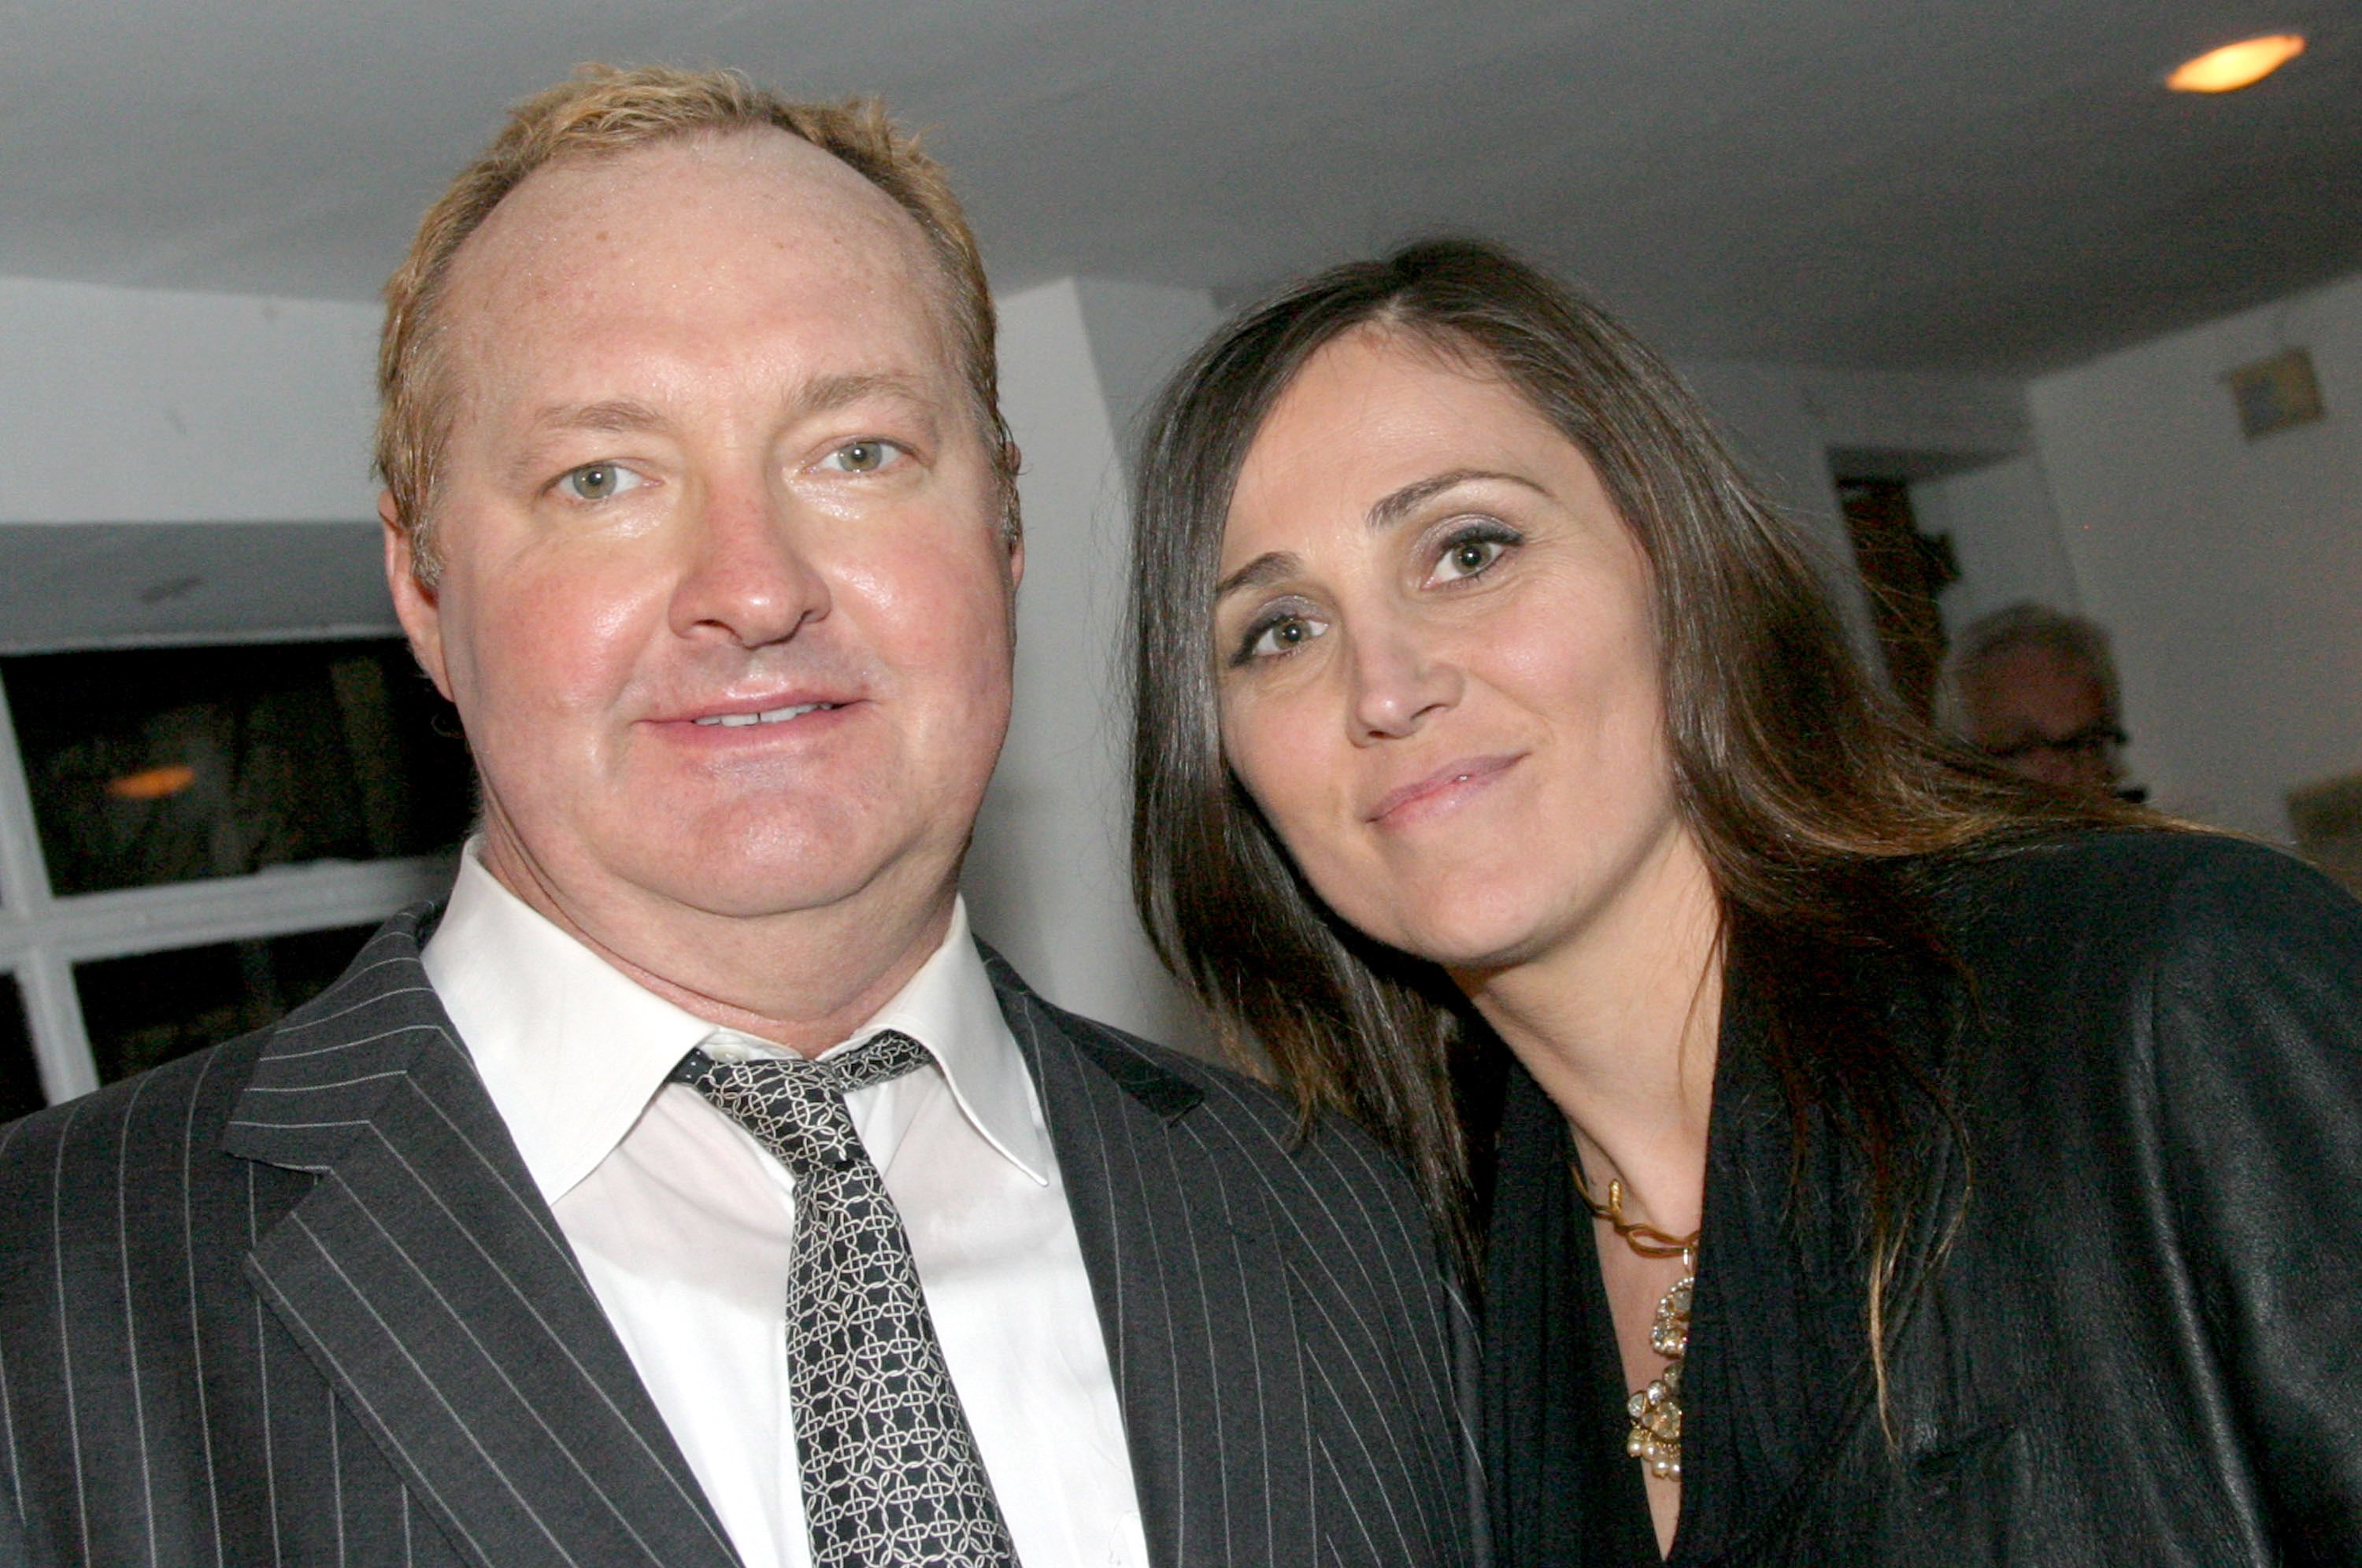 Randy Quaid and wife Evi Quaid in New York City, New York, United States, circa 2004 | Source: Getty Images